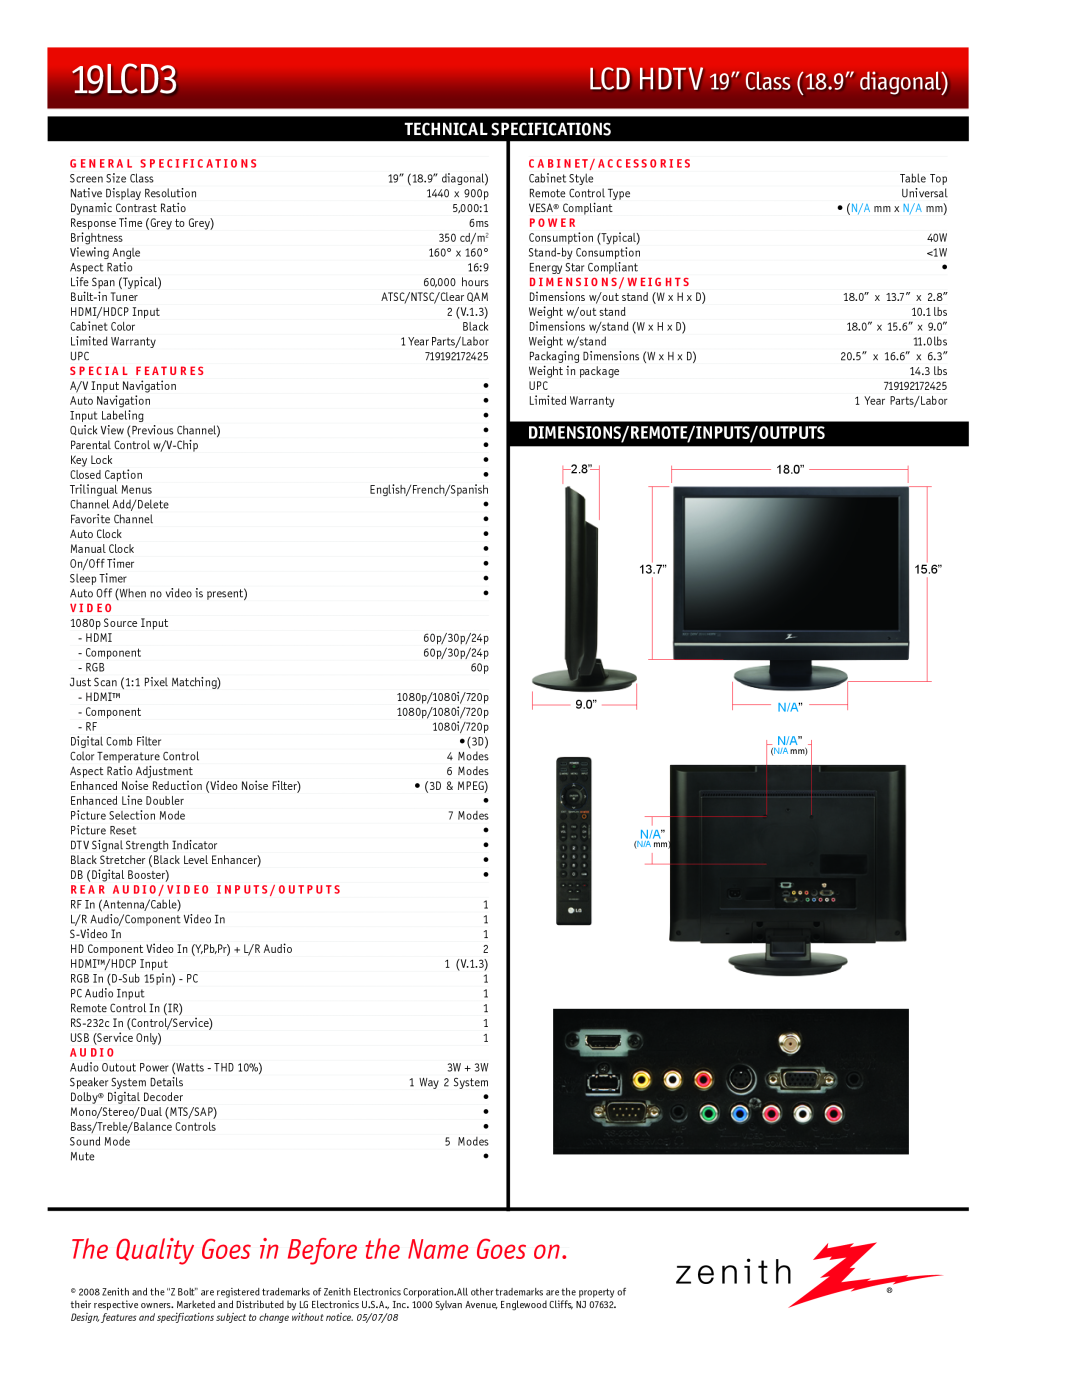 Zenith 19LCD3 Technical, Specifications, Dimensions/Remote/Inputs/Outputs, The Quality Goes in Before the Name Goes on 